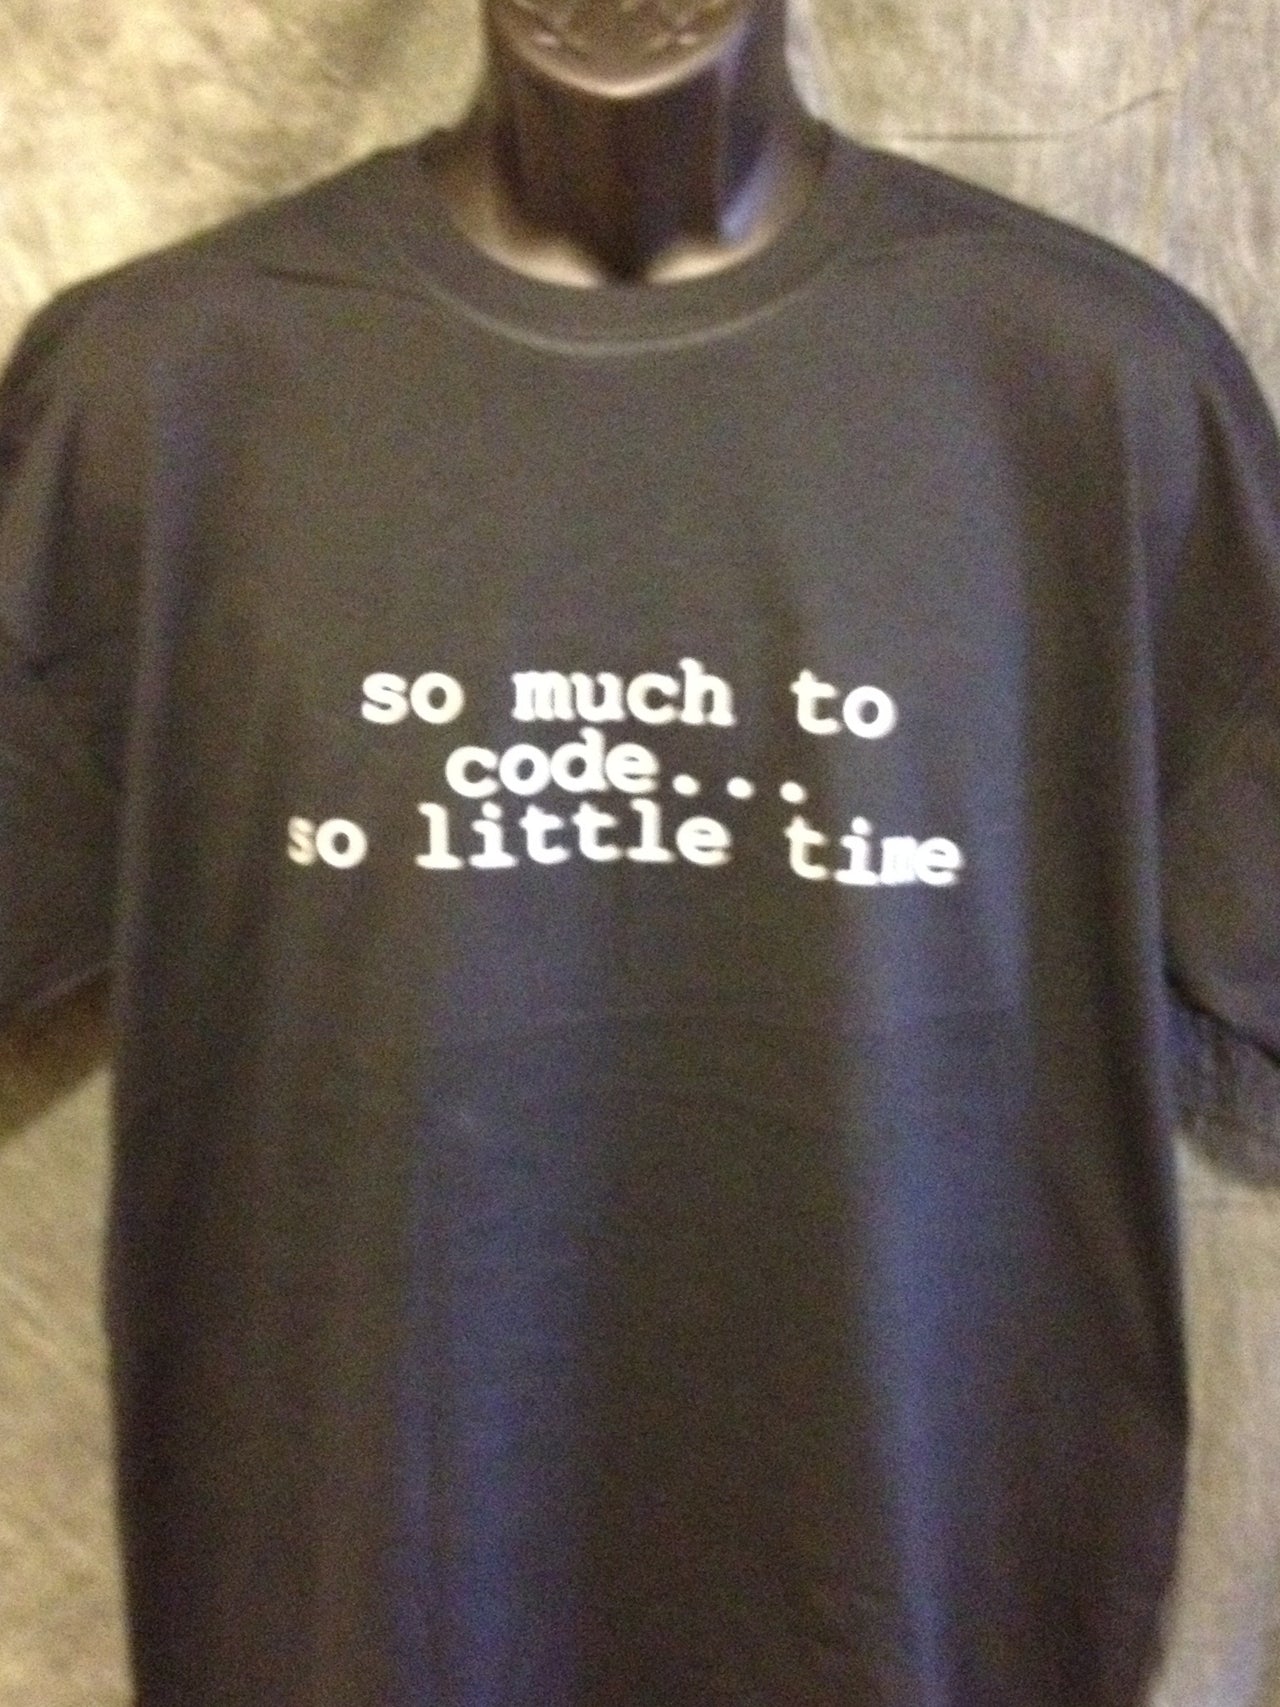 So Much To Code...So Little Time Tshirt: Black With White Print - TshirtNow.net - 4